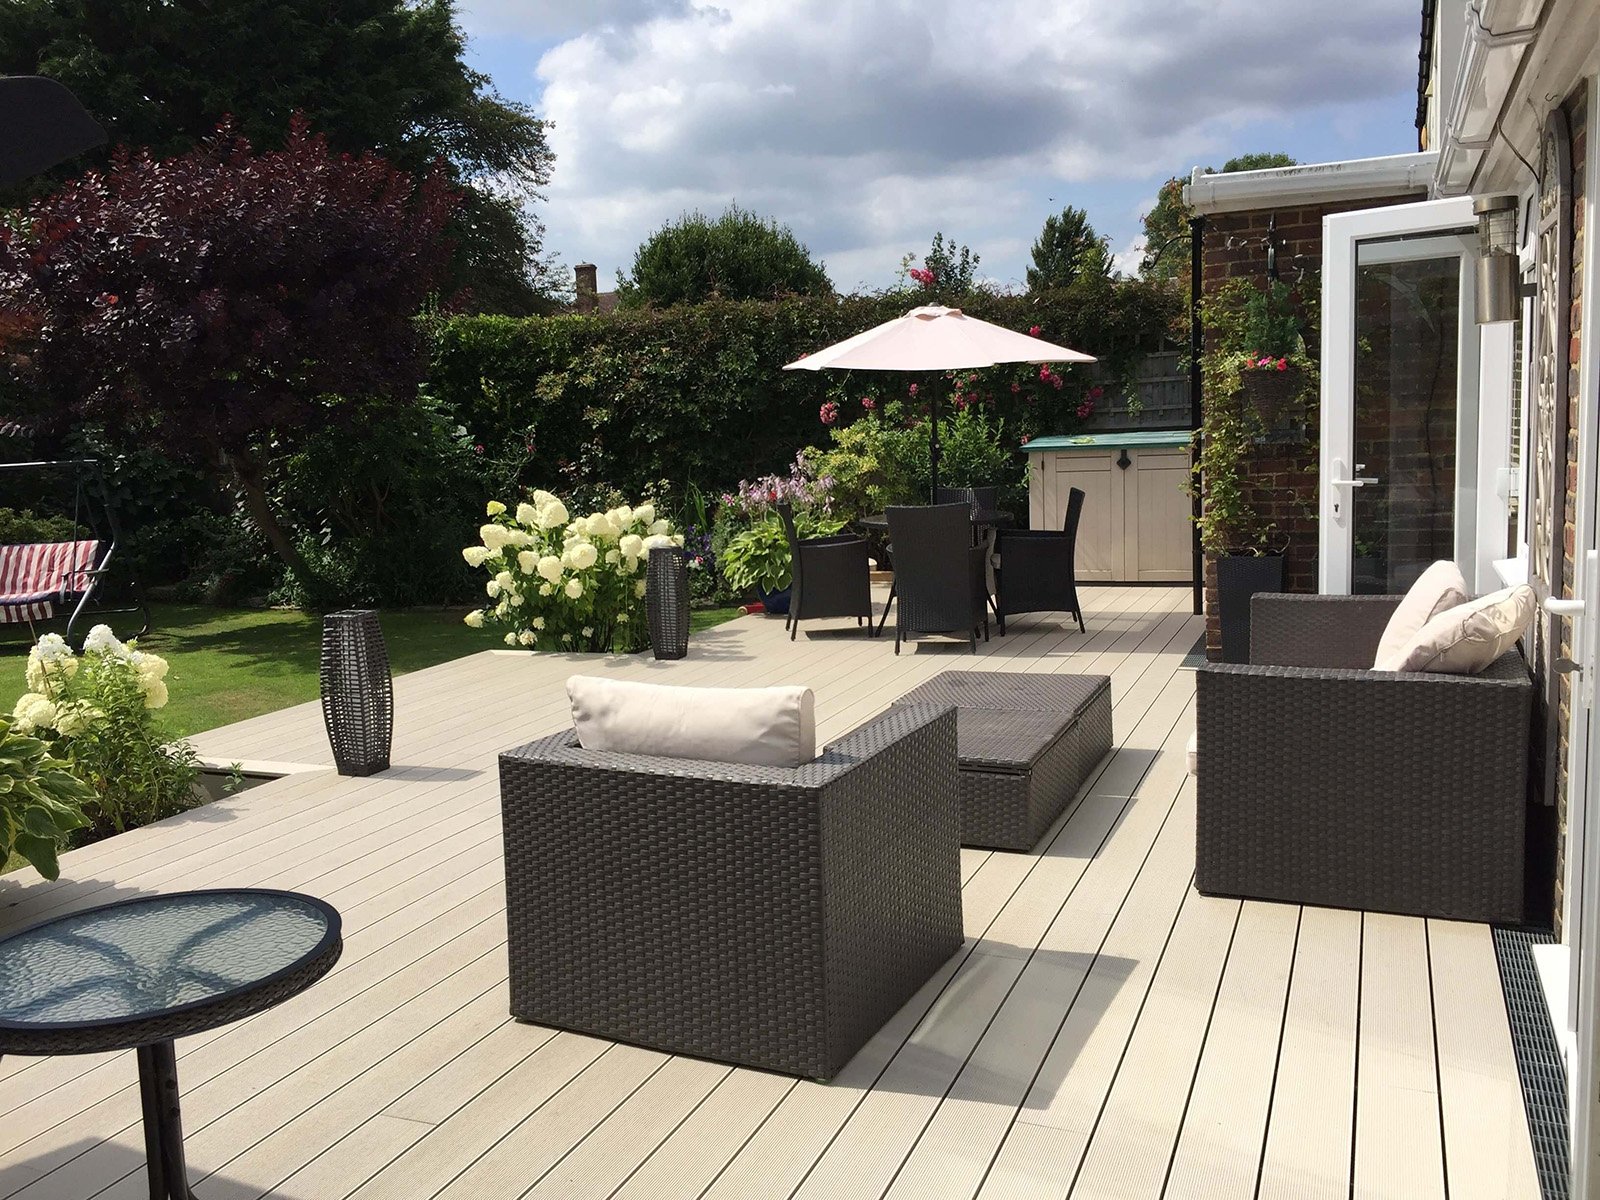 Cladco Composite Decking Boards in Ivory.